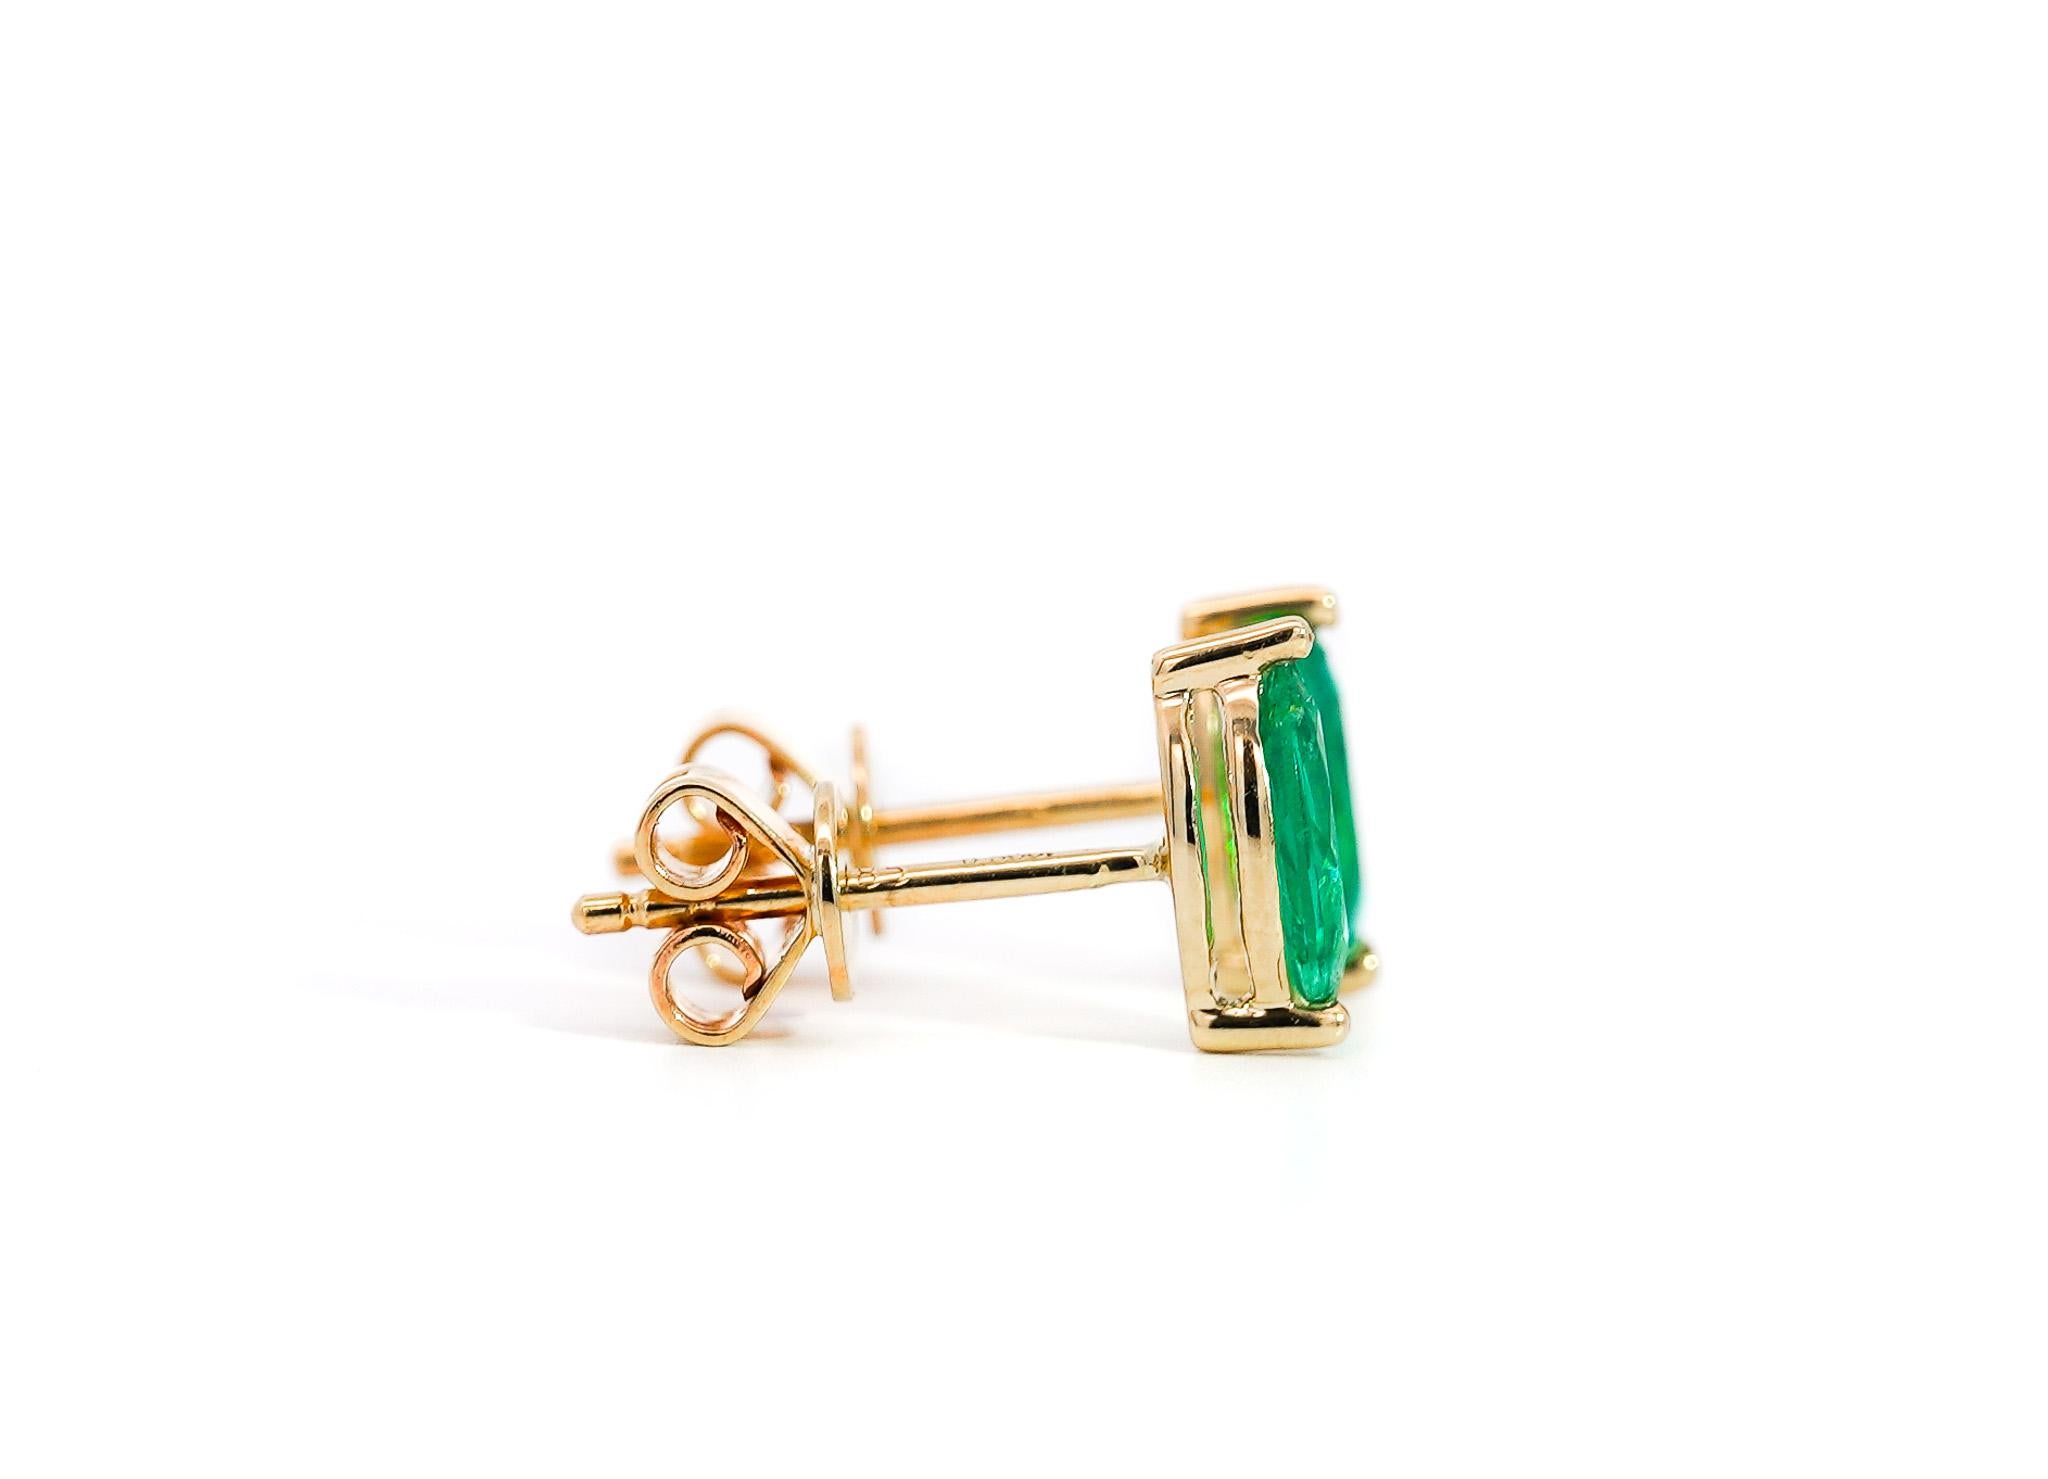 1/2 Carat Natural Emerald Marquise Cut 8MM Stud Earrings in 14K Yellow Gold In New Condition For Sale In Miami, FL